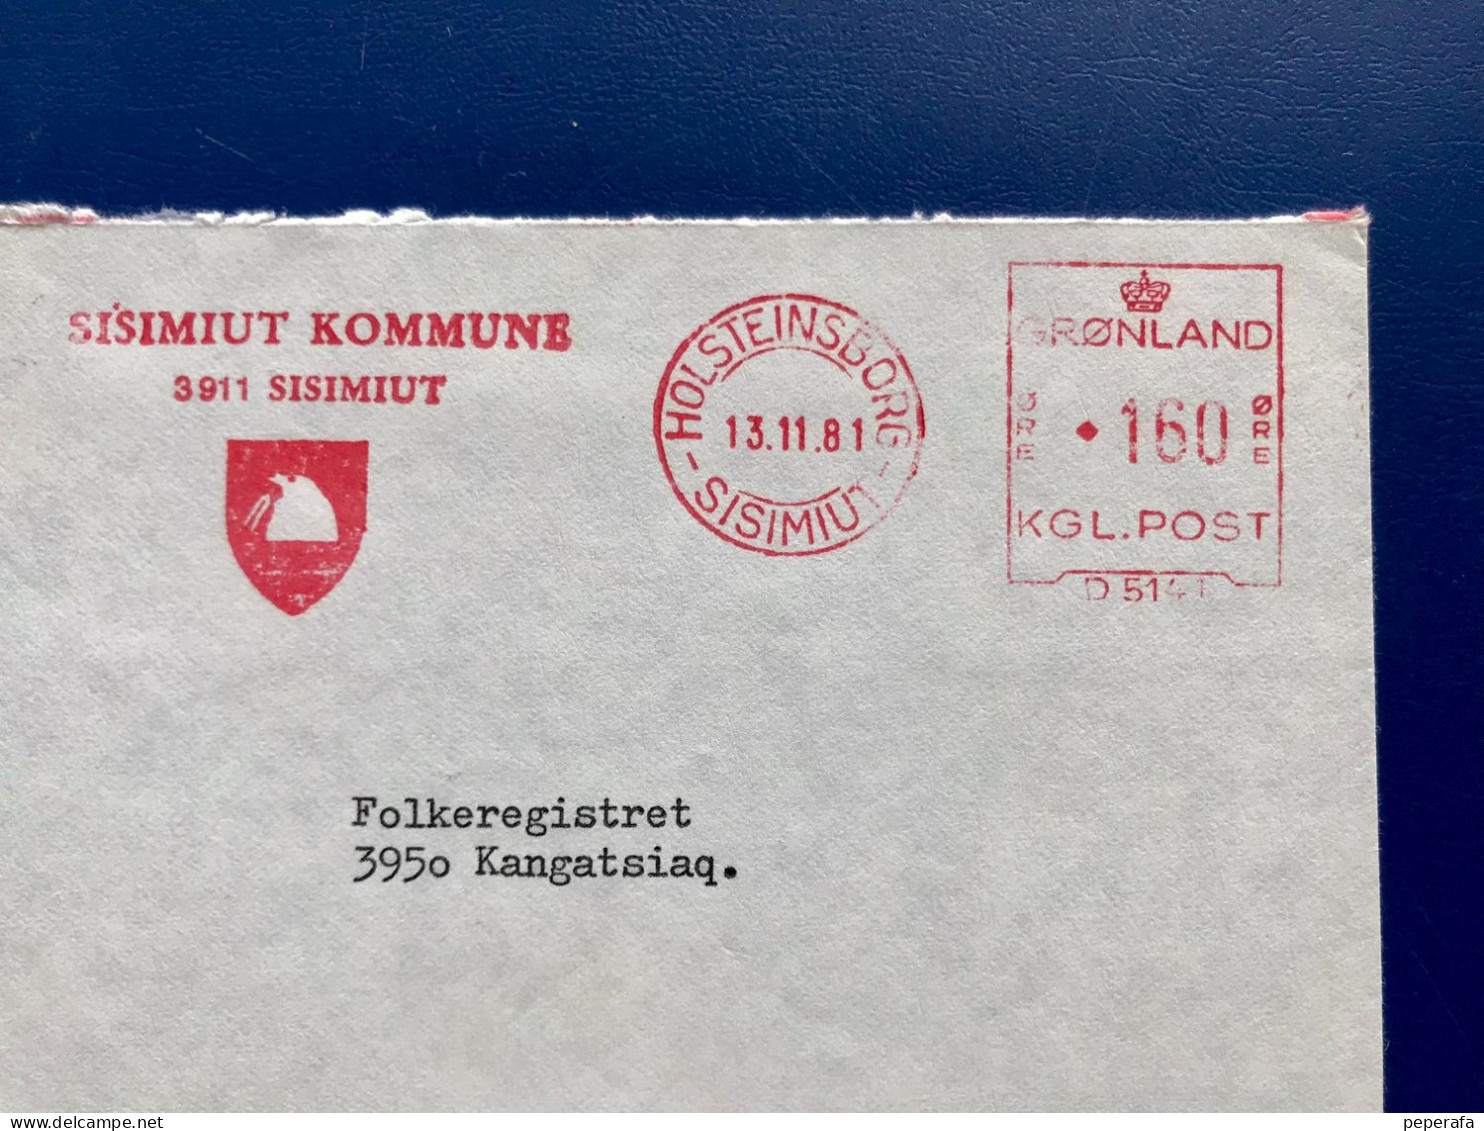 Denmark, Greenland GRØNLAND, 2 COVER POSTAGE METER, FRANQUEO MECÁNICO (FRANCOFILIA 3) - Marcophilie